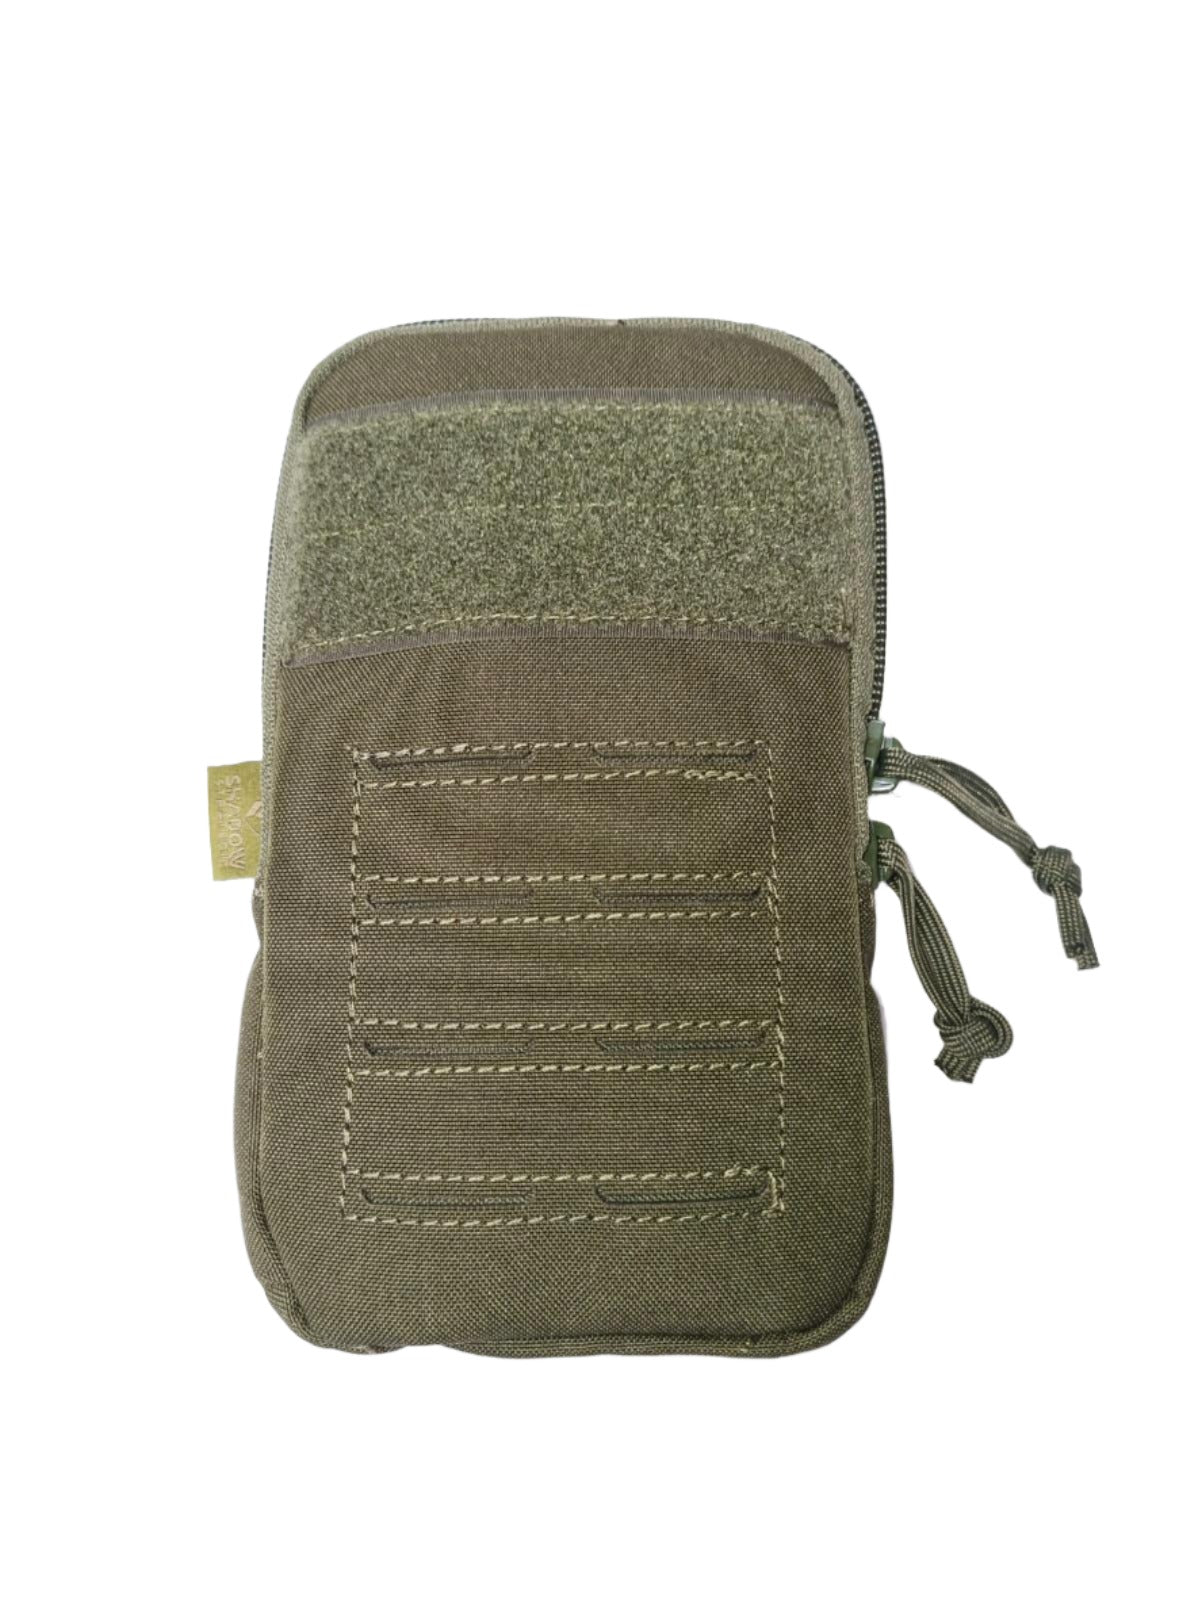 SHS-1038-Cell Phone Pouch with Molle loop-OD